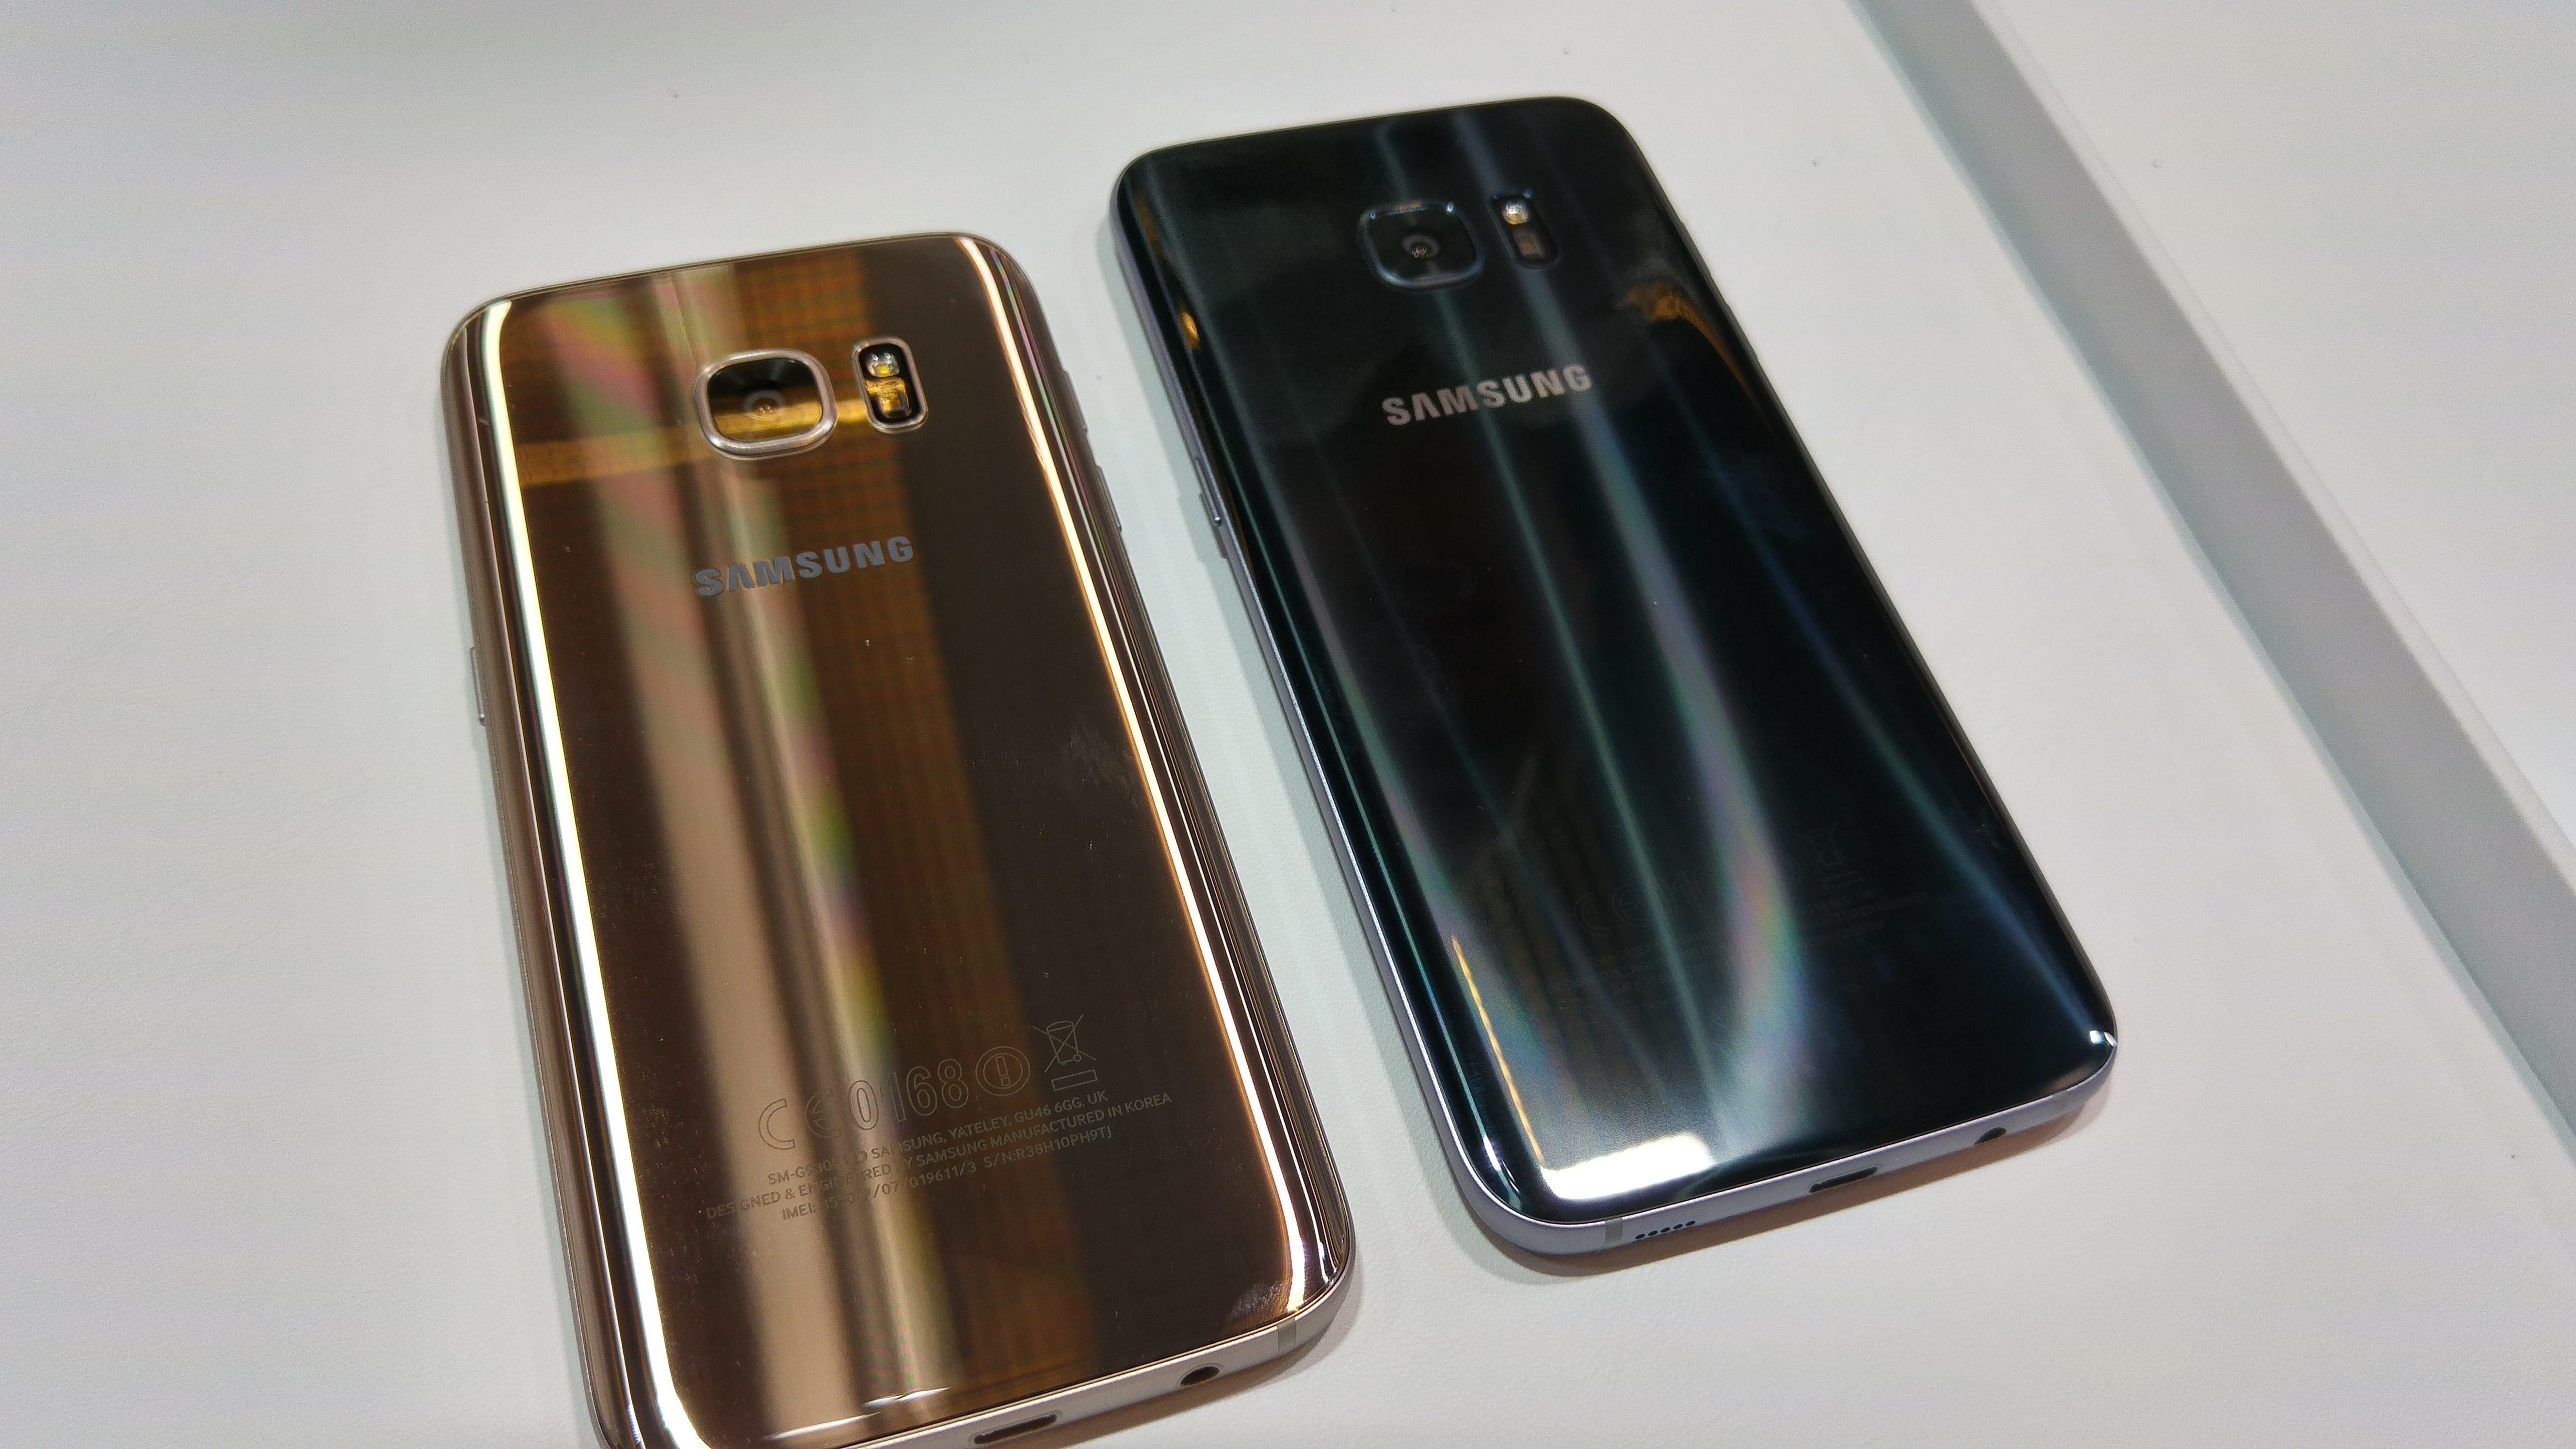 Samsung to launch new glossy black Galaxy S7 in December 2016